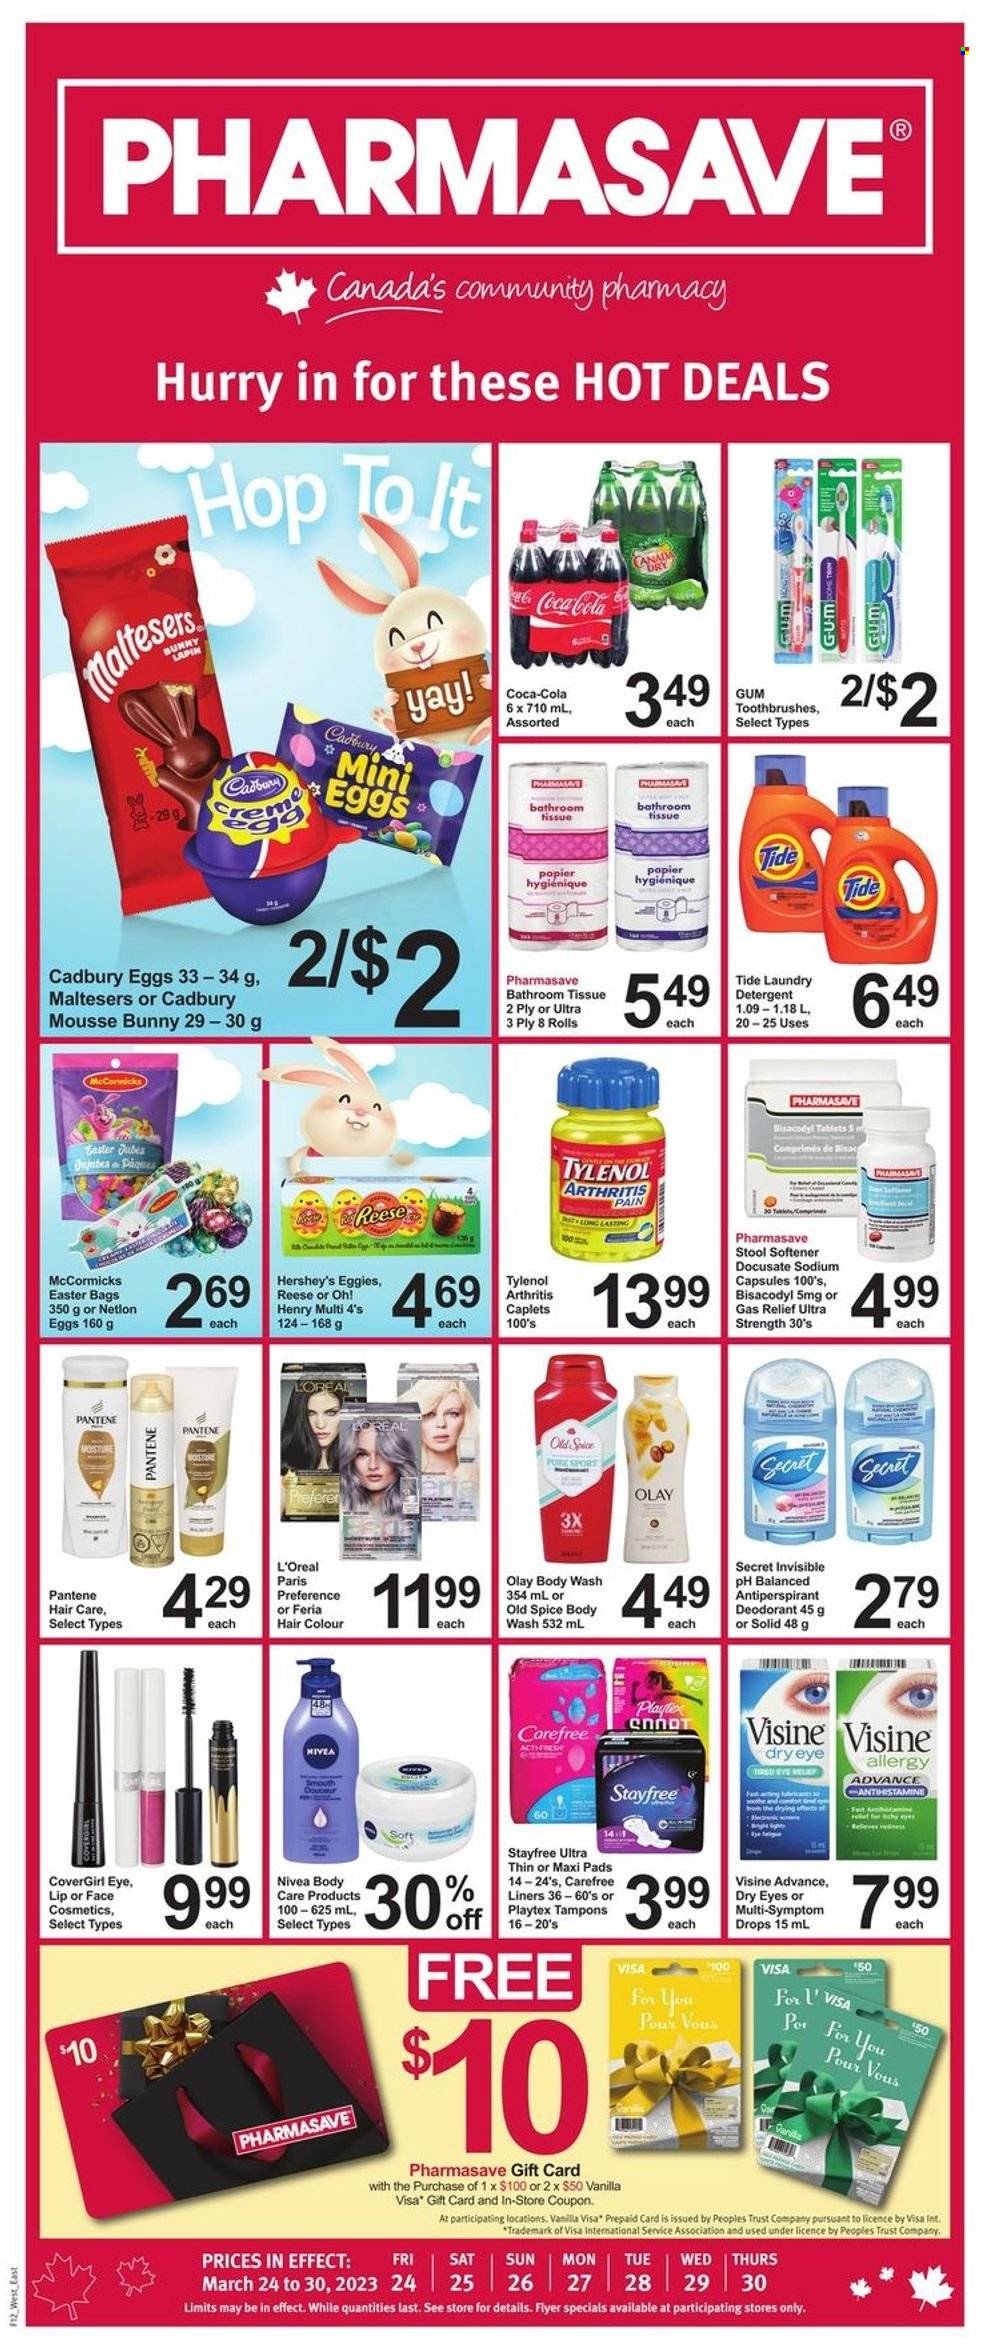 thumbnail - Pharmasave Flyer - March 24, 2023 - March 30, 2023 - Sales products - Hershey's, Maltesers, Cadbury, chocolate egg, spice, Coca-Cola, Nivea, bath tissue, Tide, fabric softener, laundry detergent, body wash, Stayfree, Playtex, sanitary pads, Carefree, tampons, L’Oréal, Olay, Pantene, hair color, anti-perspirant, Trust, Tylenol, detergent, Old Spice, deodorant. Page 1.